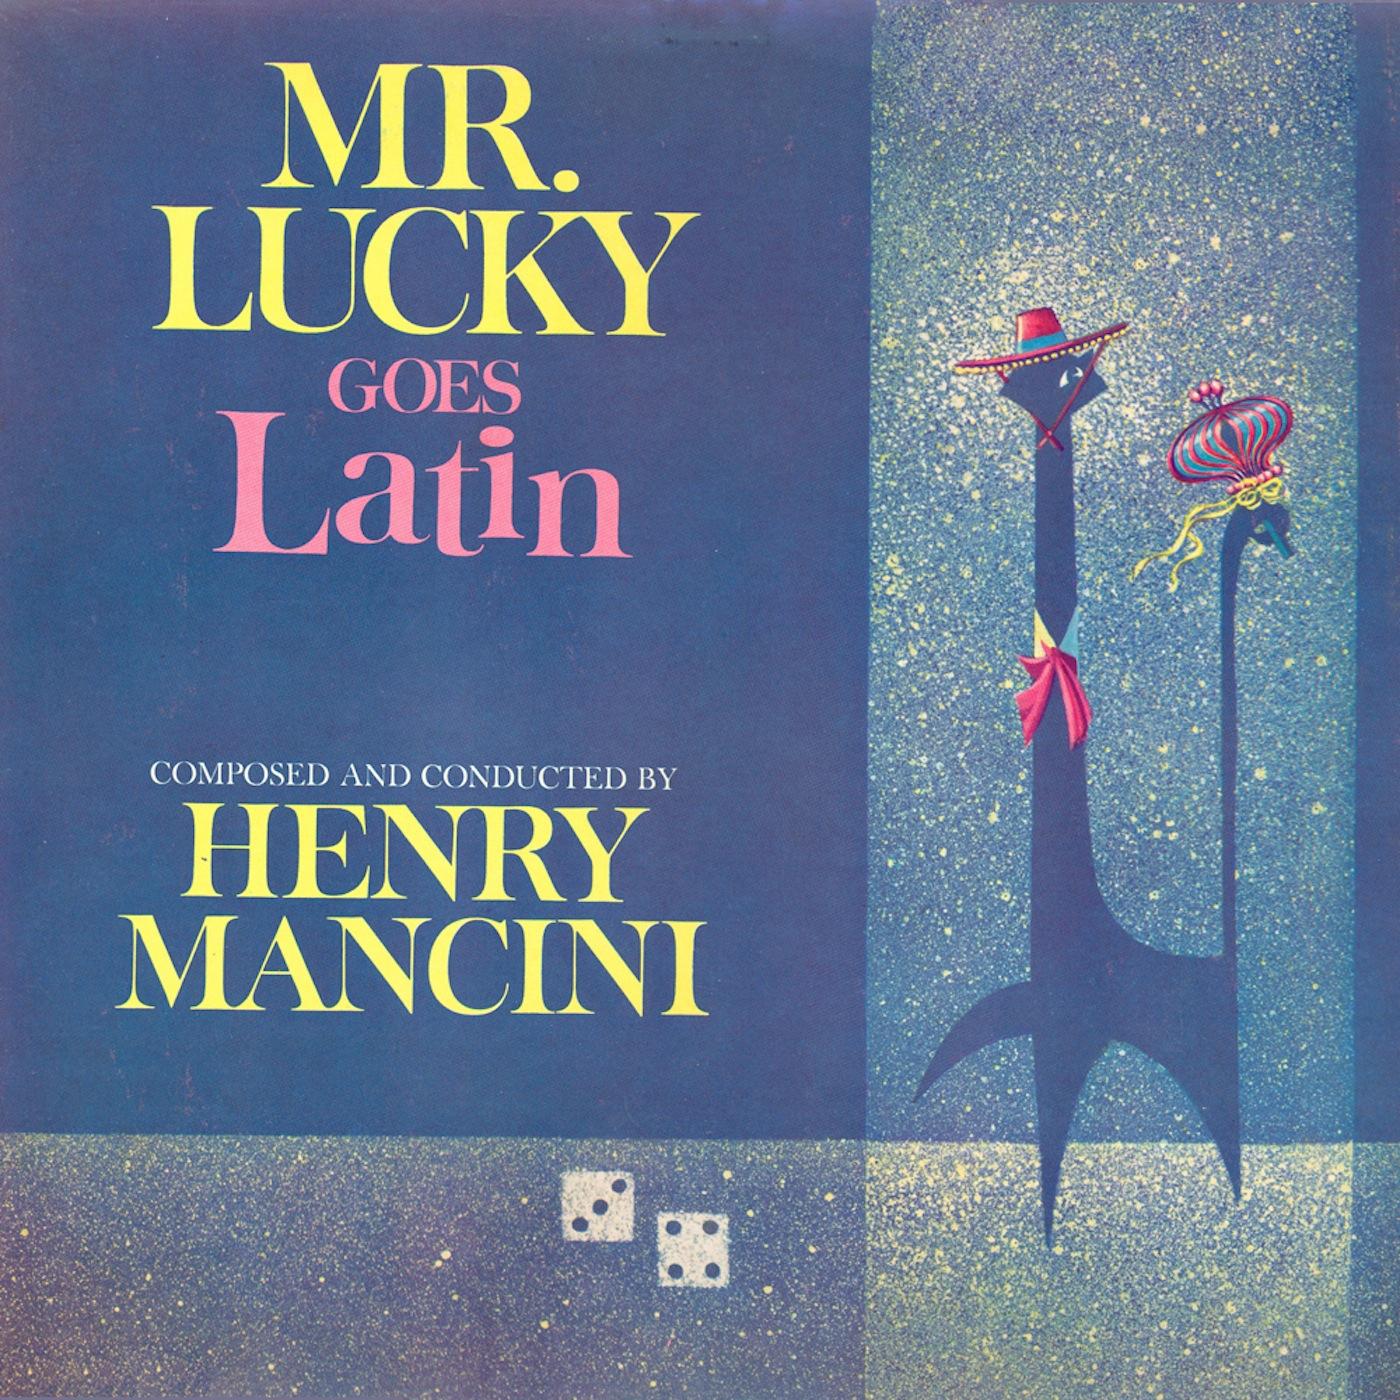 Mr. Lucky Goes Latin (Original Television Soundtrack) [Remastered]